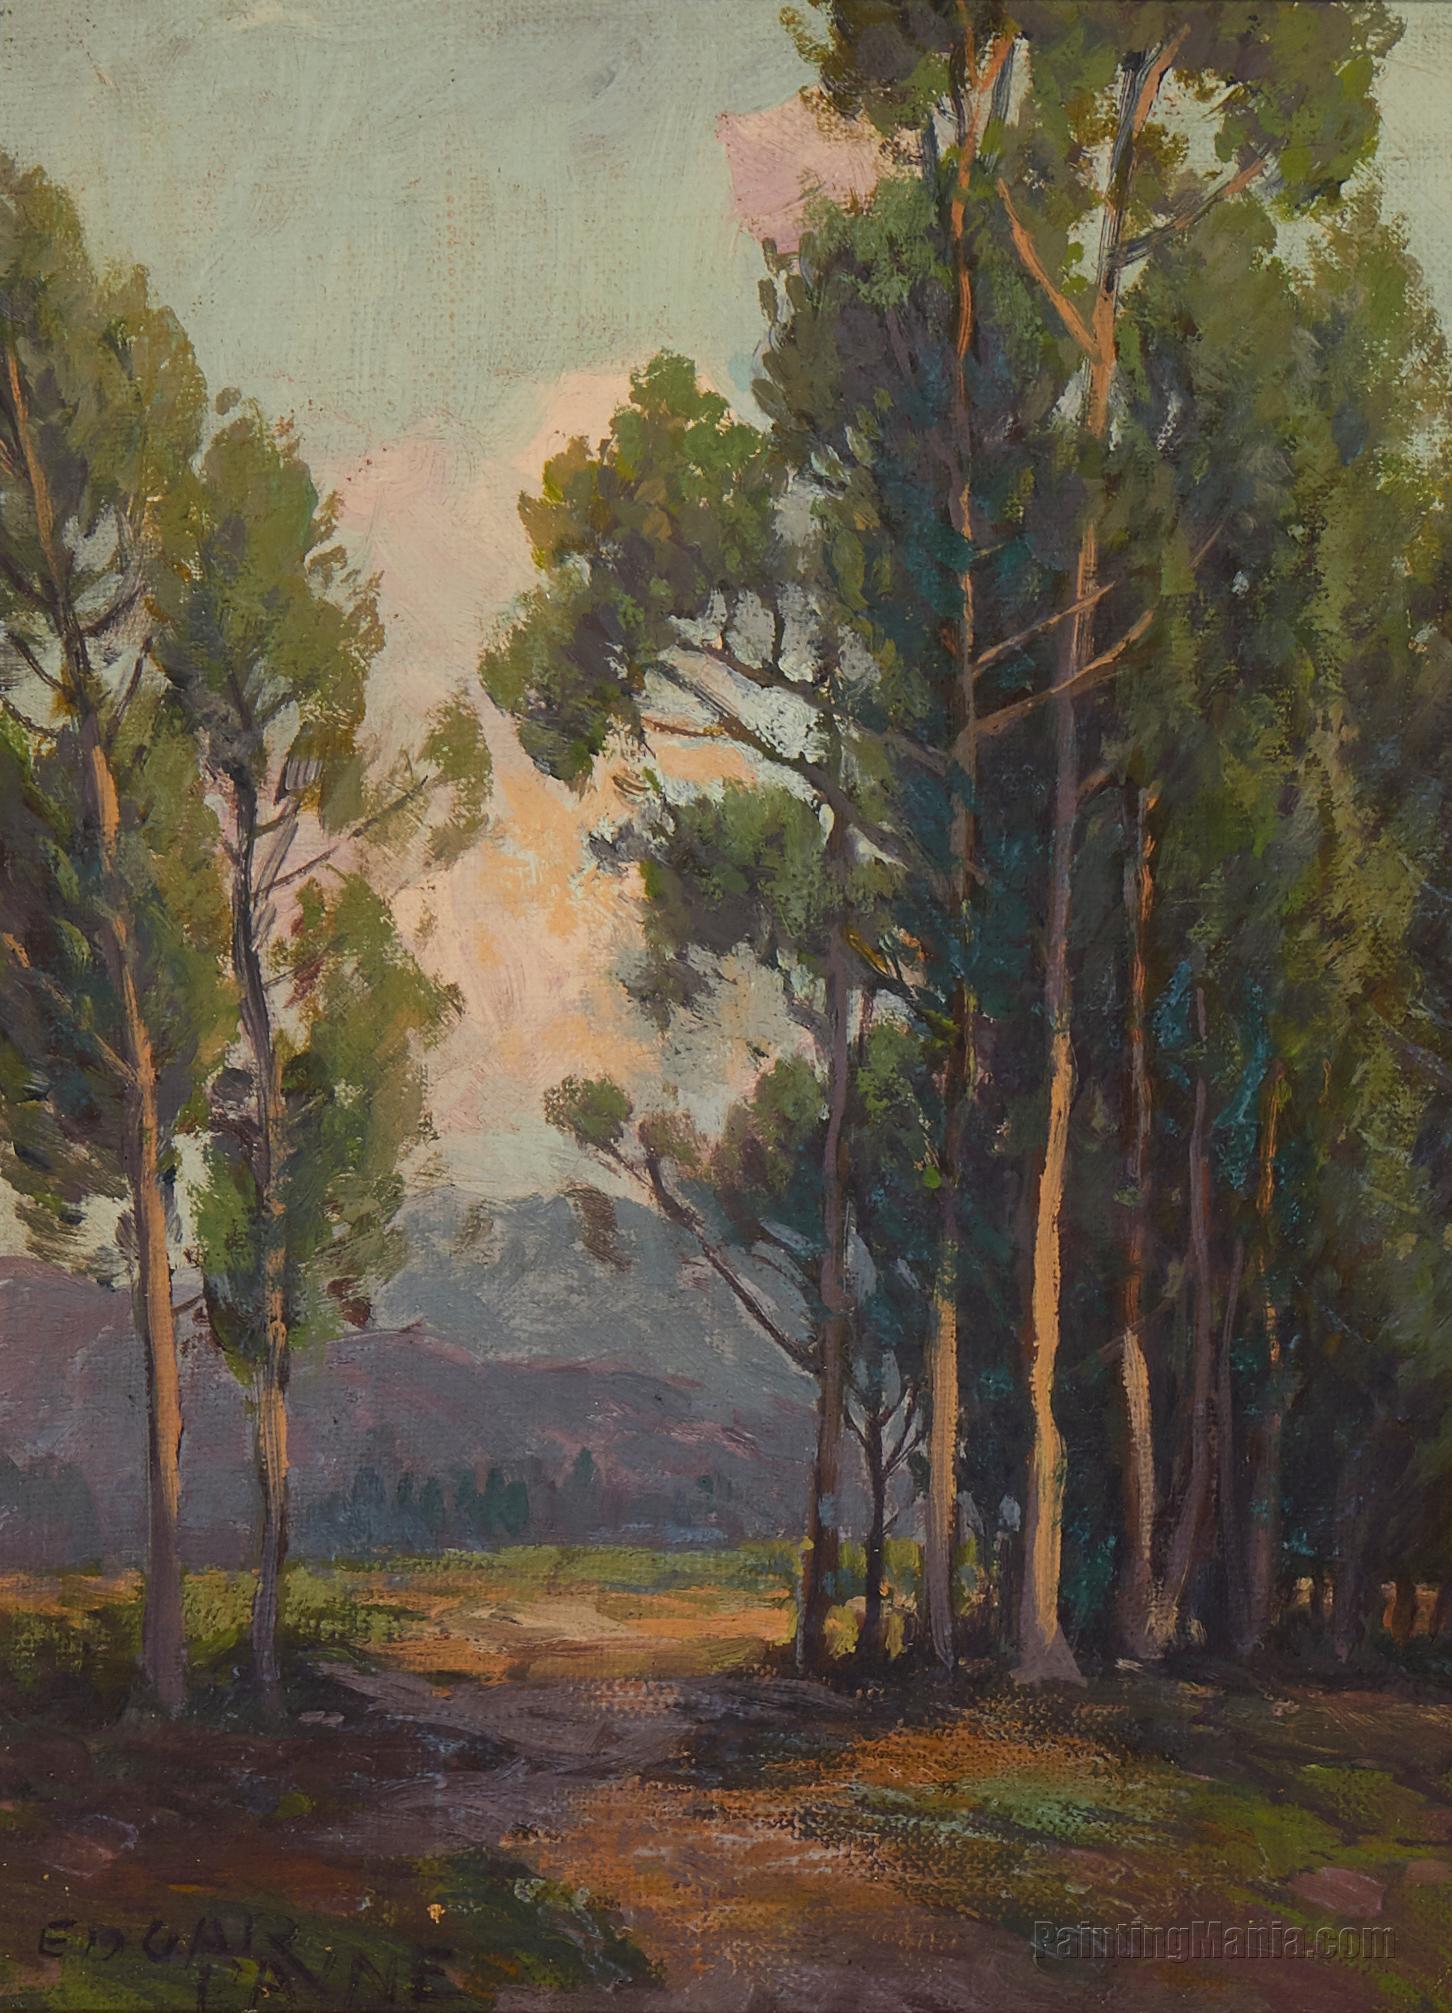 Atmospheric Landscape With Trees